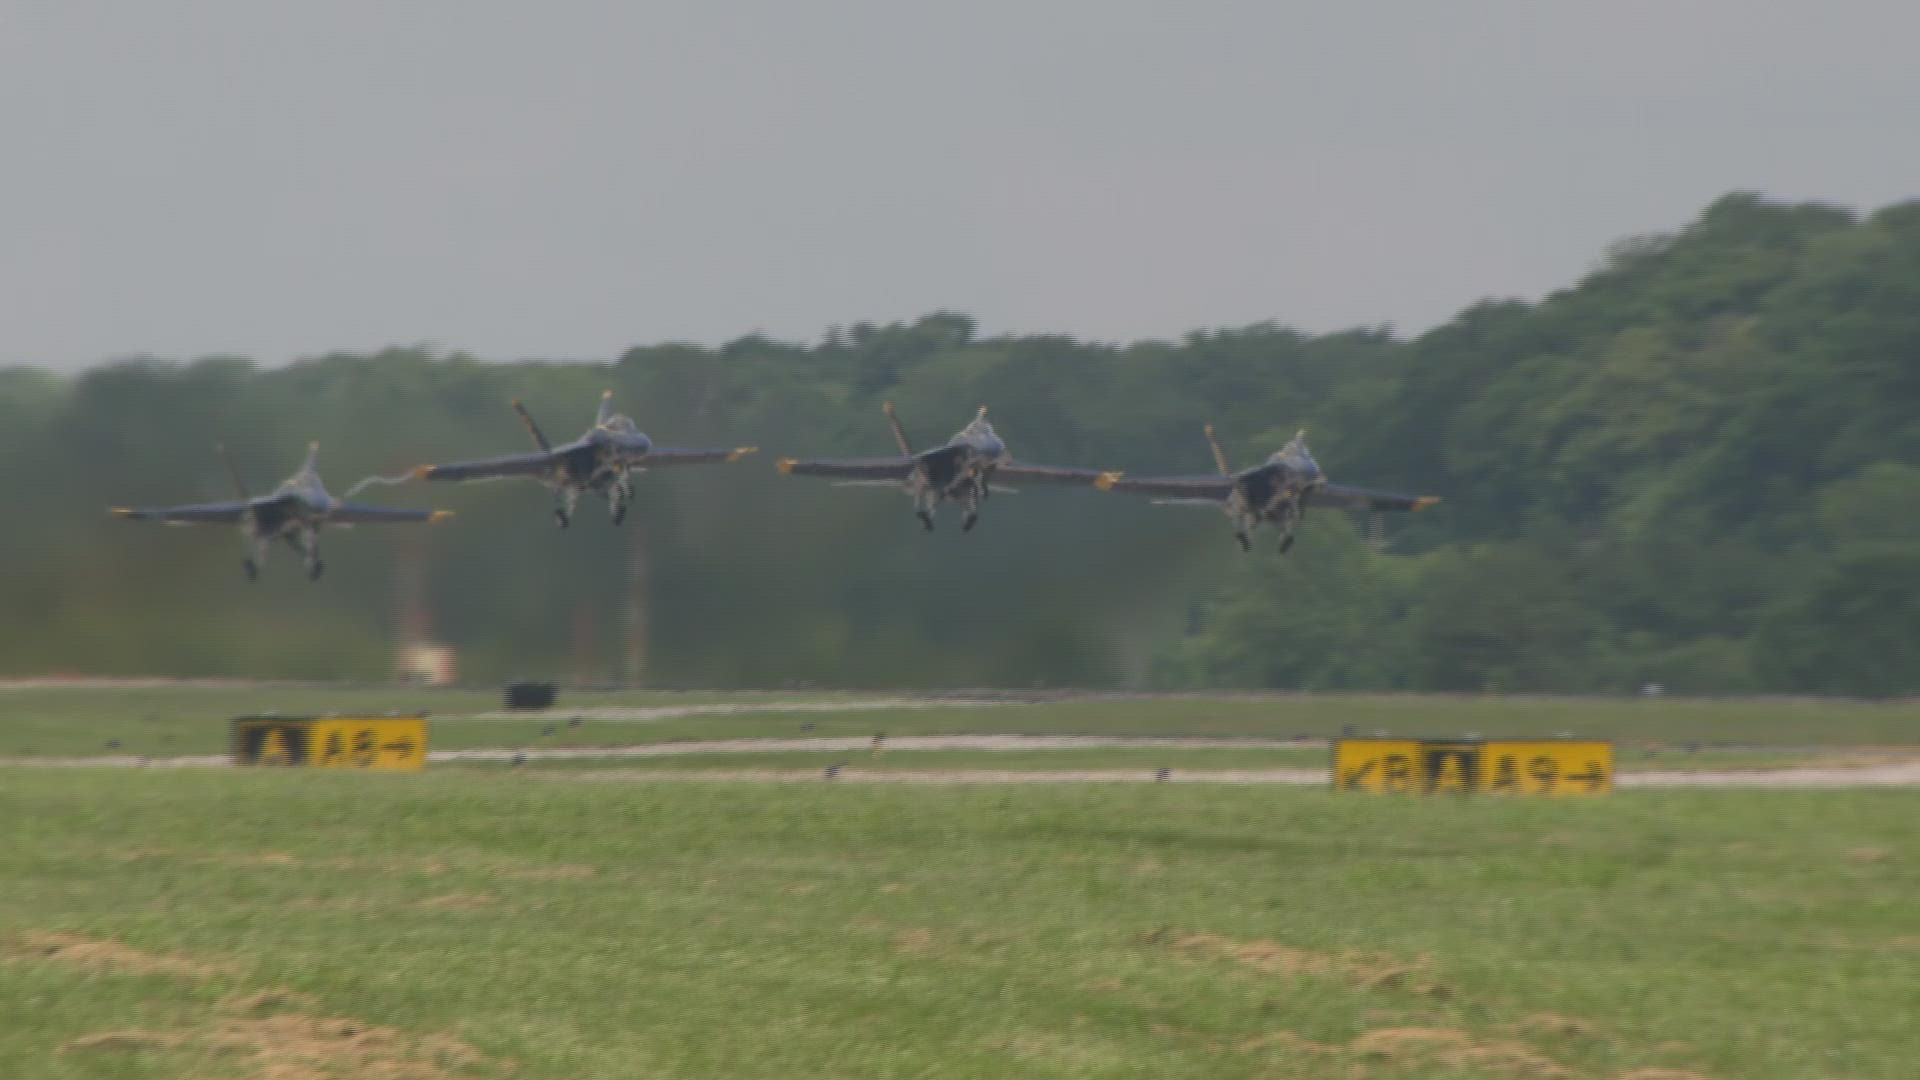 Extended performance Spirit of St. Louis Air Show featuring the Blue